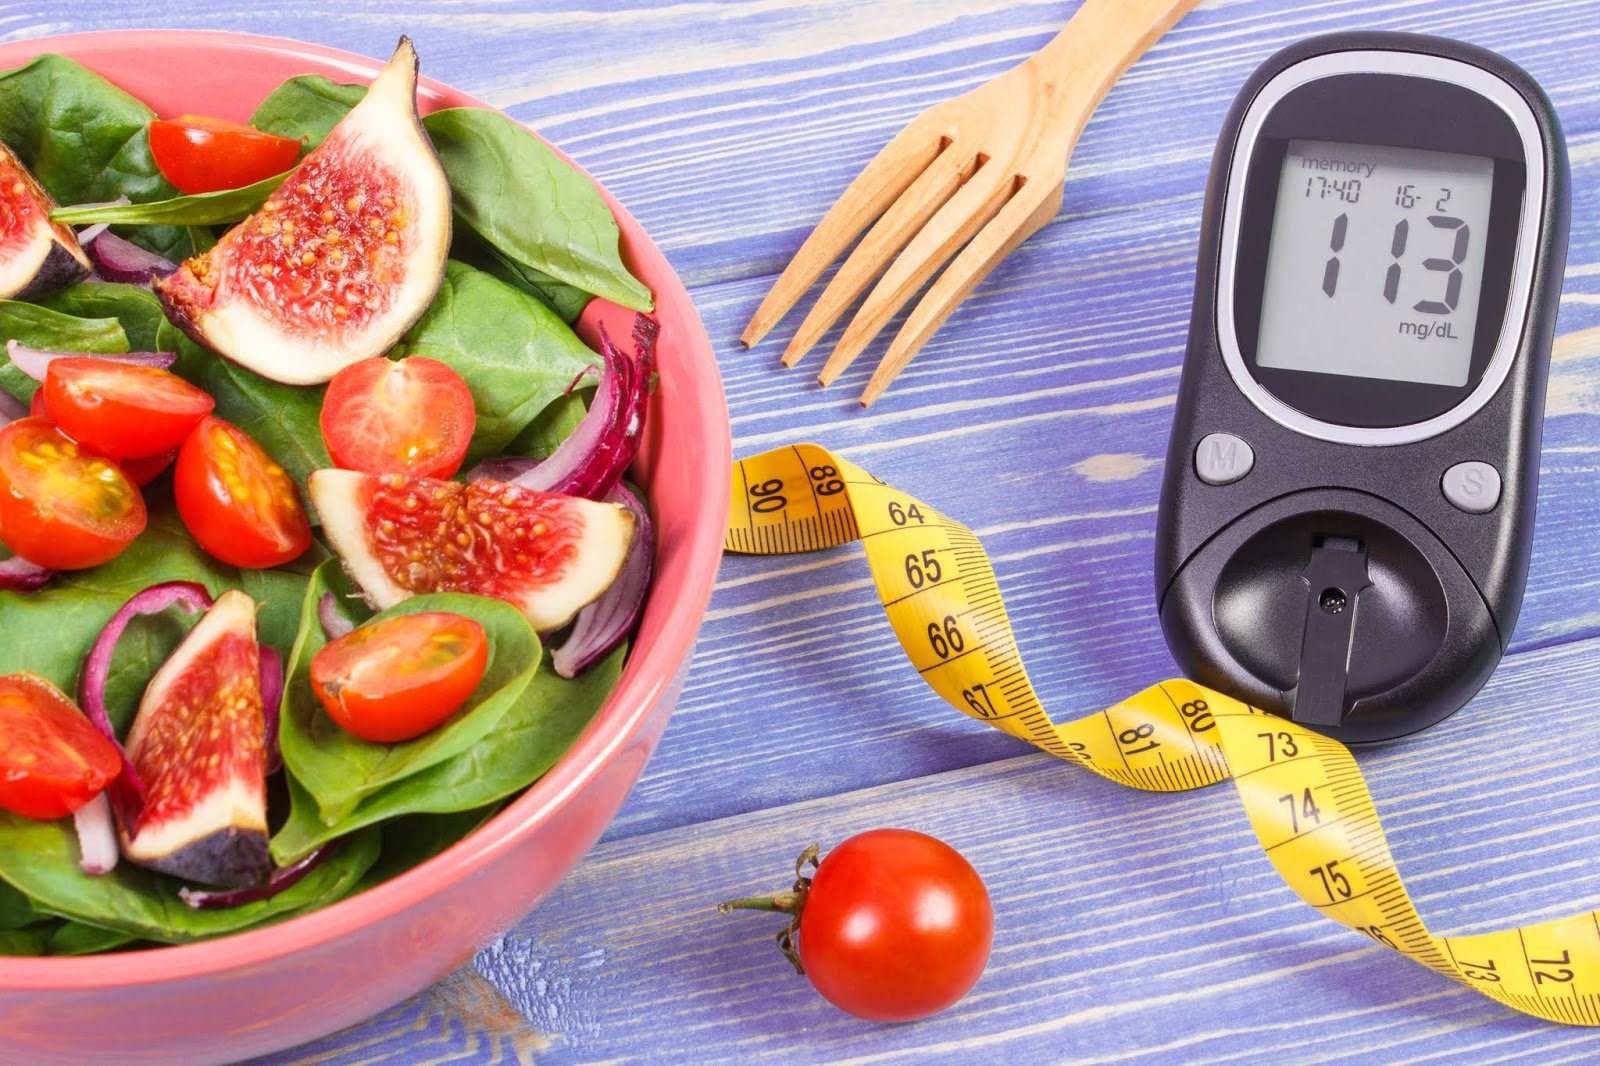 How to maintain normal blood sugar